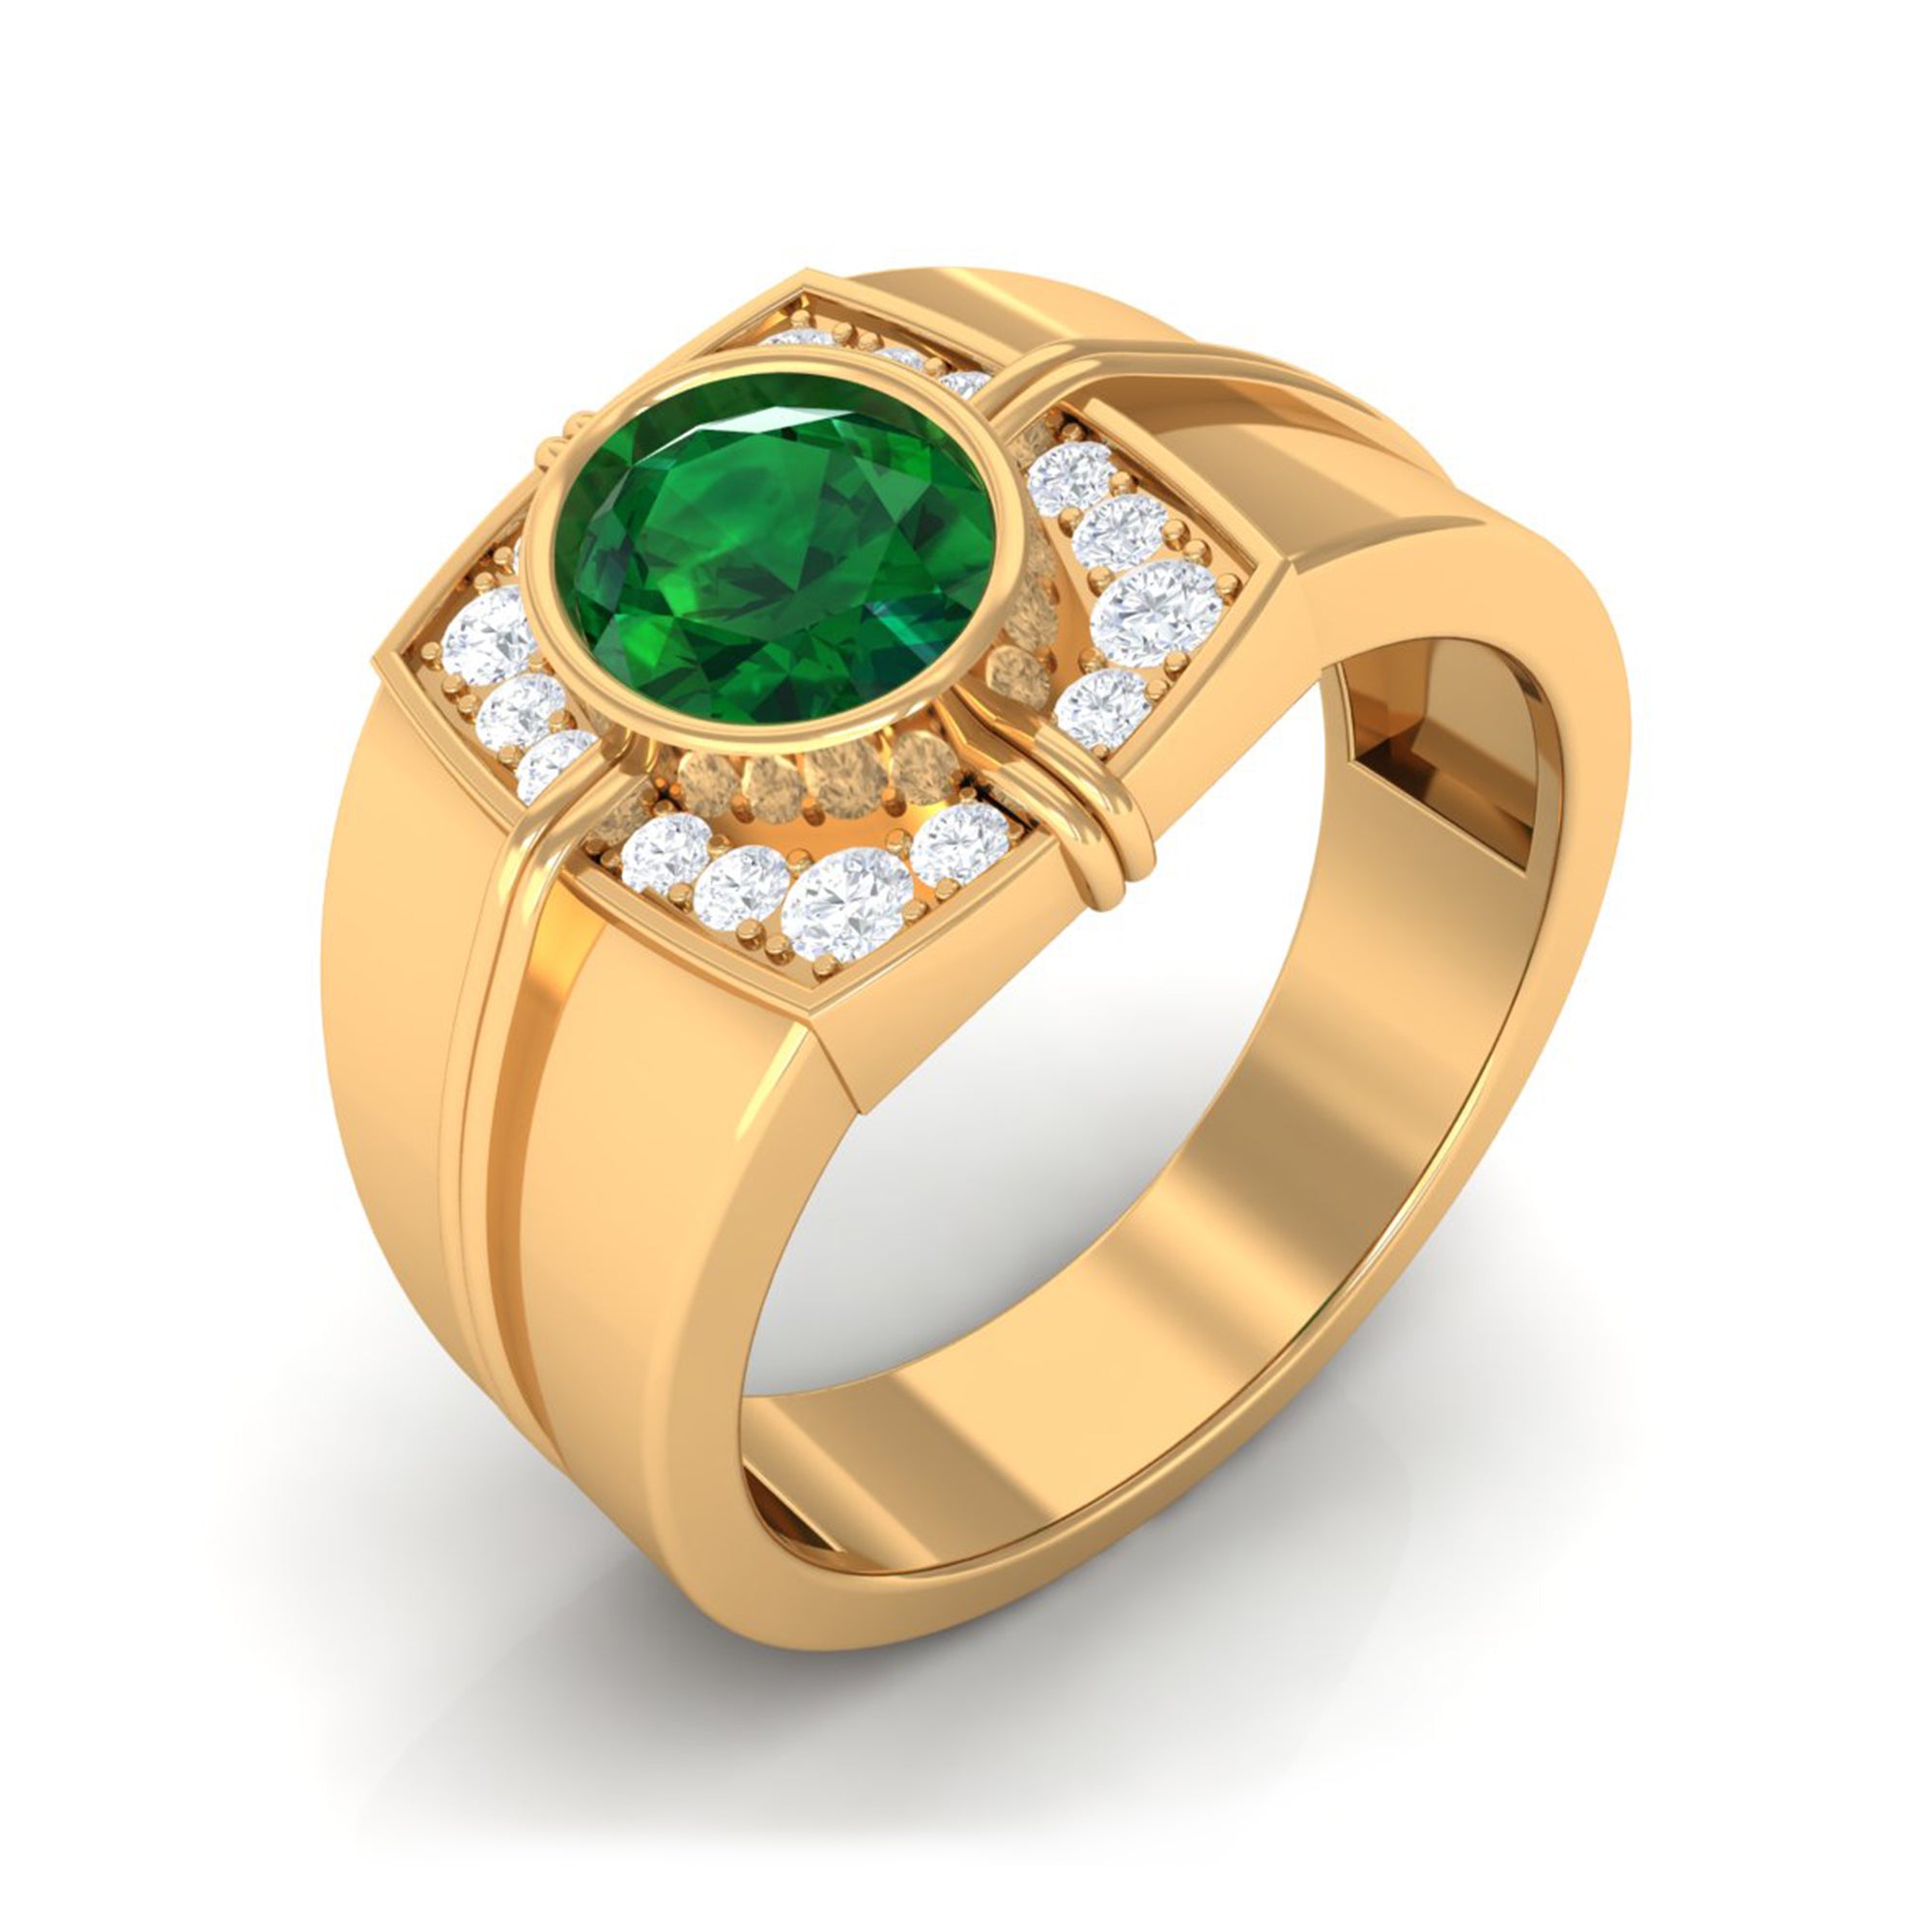 Vintage Style Oval Shape Emerald Engagement Ring with Diamond Lab Grown Emerald-AAAA Quality - Virica Jewels